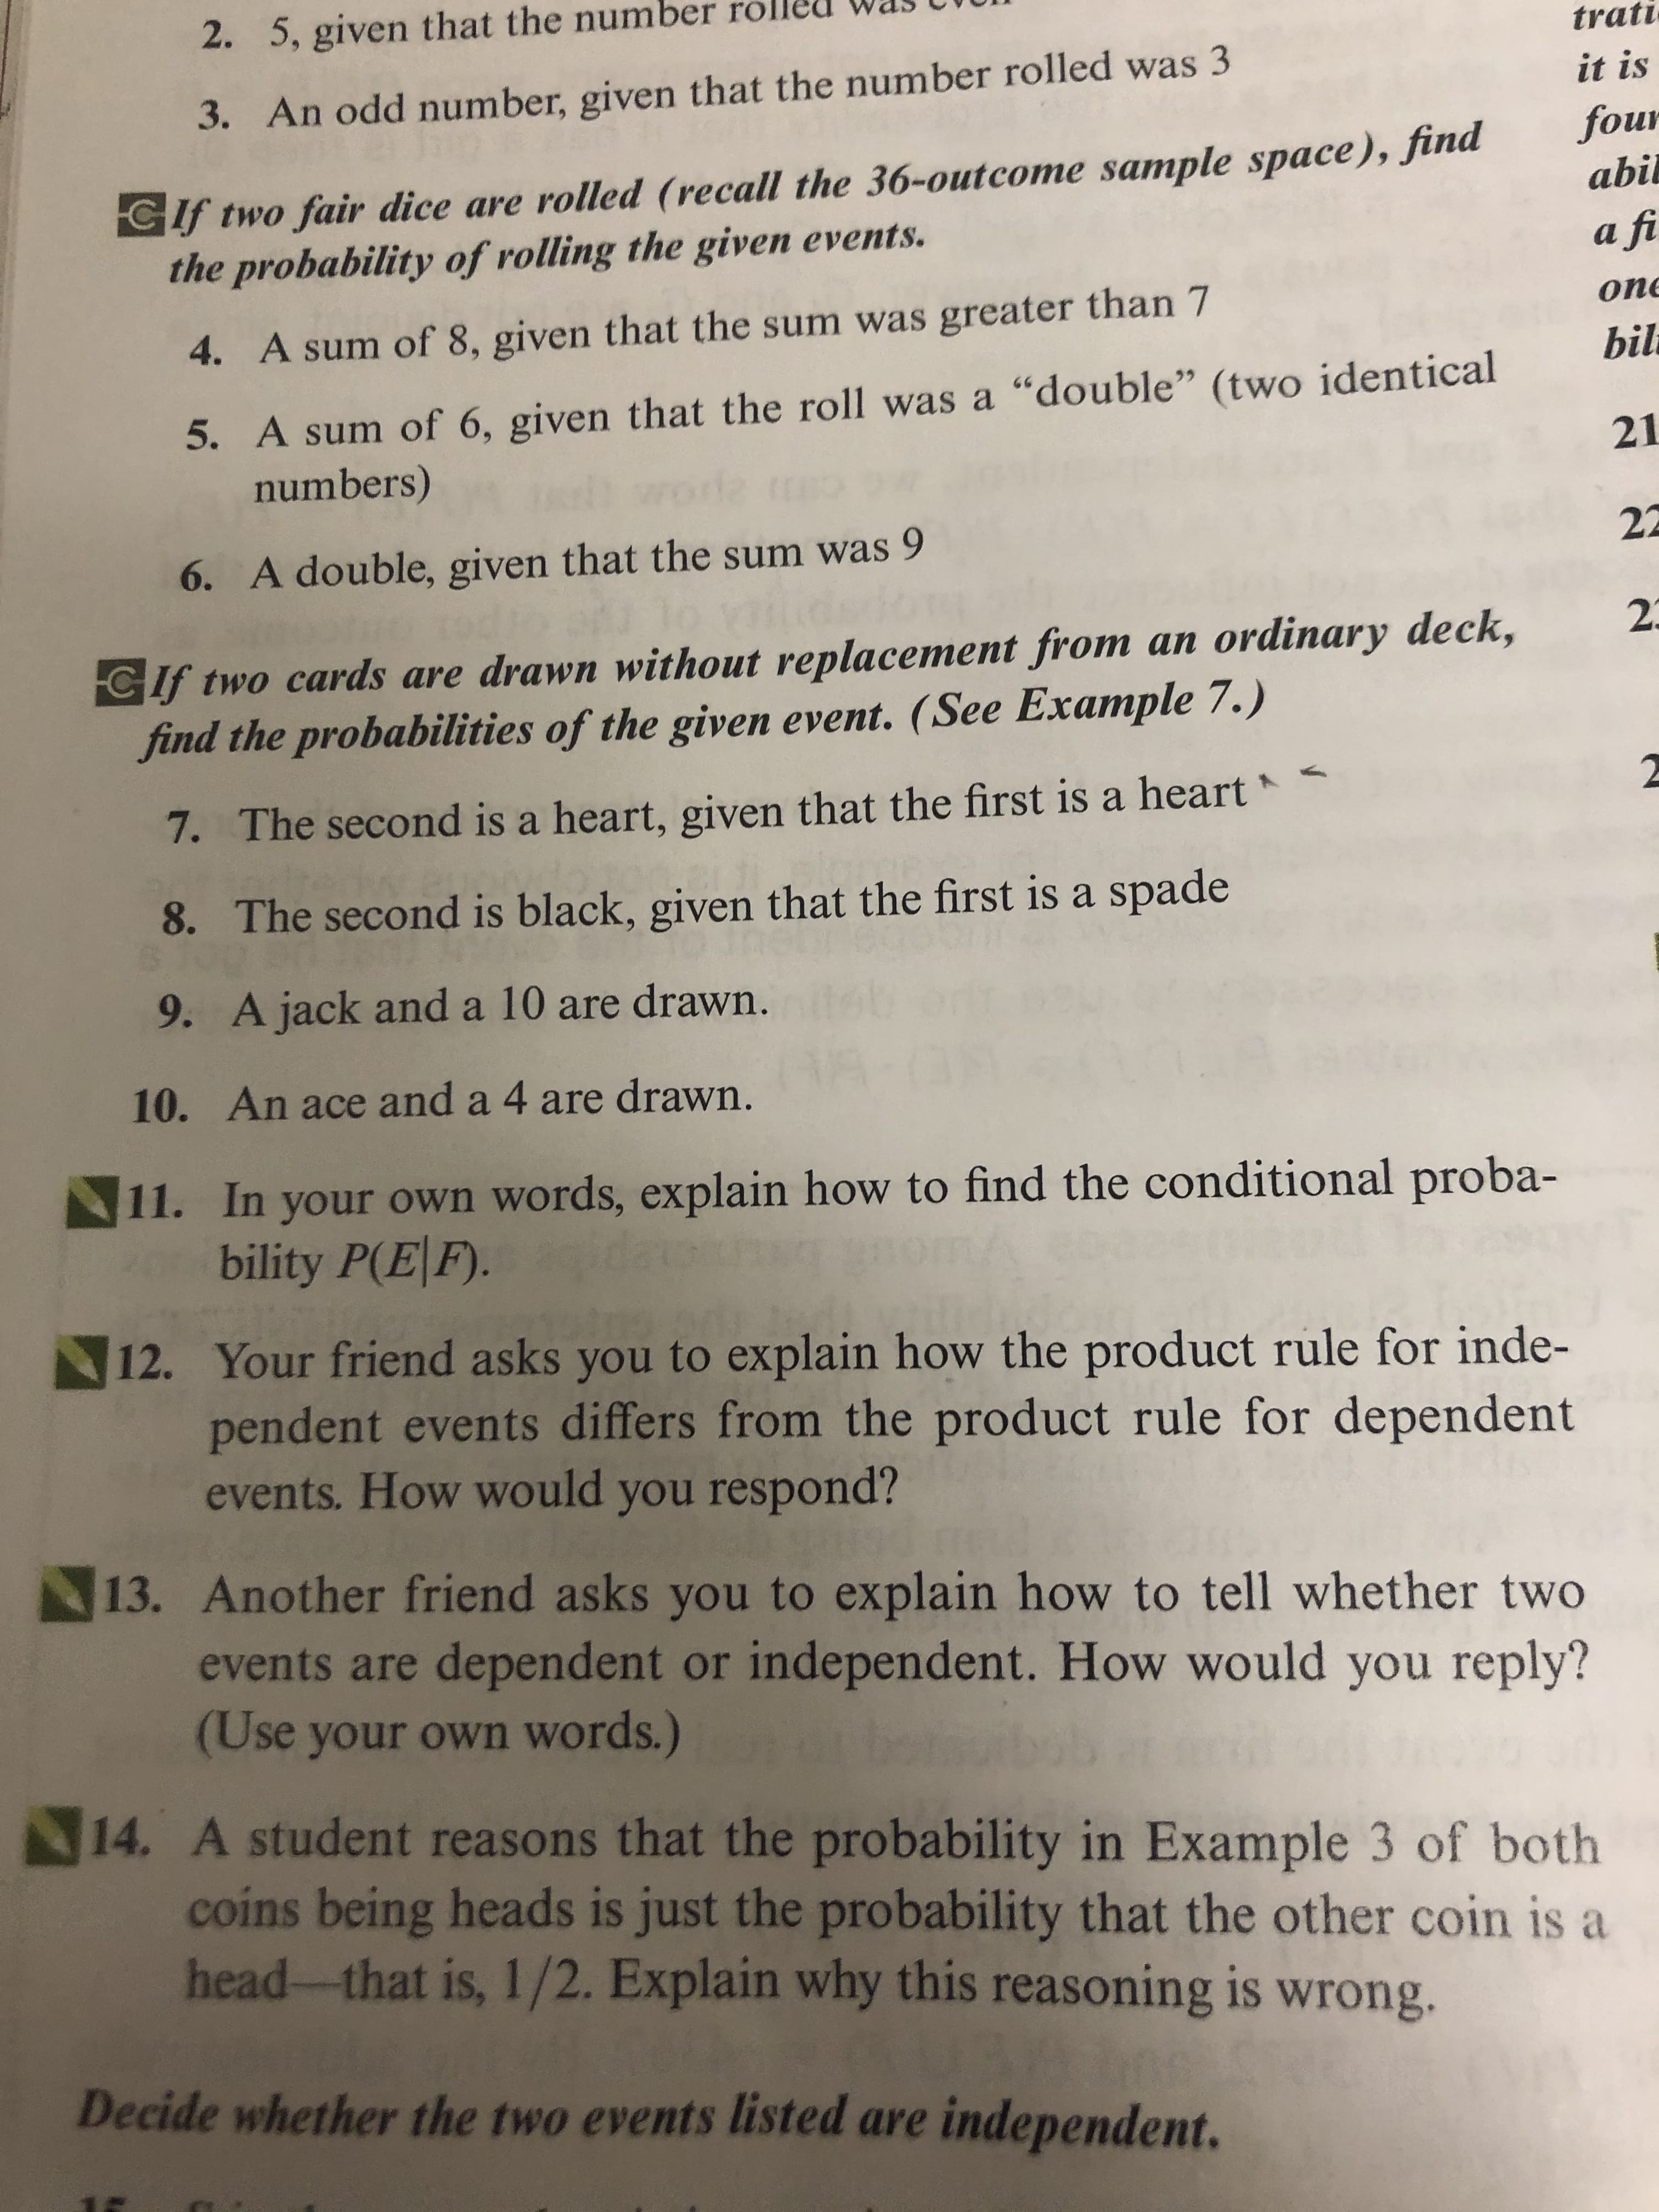 2. 5, given that the number
trati
it is
3. An odd number, given that the number rolled was 3
four
Cif two fair dice are rolled (recall the 36-outcome sample space), Jina
the probability of rolling the given events.
abil
a fi
оne
4. A sum of 8, given that the sum was greater than 7
bil
5. A sum of 6, given that the roll was a "double" (two identical
numbers)
21
22
6. A double, given that the sum was 9
23
CIf two cards are drawn without replacement from an ordinary deck,
find the probabilities of the given event. (See Example 7.)
7.
The second is a heart, given that the first is a heart
A
8. The second is black, given that the first is a spade
9. A jack and a 10 are drawn.
10. An ace and a 4 are drawn.
11. In your own words, explain how to find the conditional proba-
bility P(EF).
12. Your friend asks you to explain how the product rule for inde-
pendent events differs from the product rule for dependent
events. How would you respond?
13. Another friend asks you to explain how to tell whether two
events are dependent or independent. How would you reply?
(Use your own words.)
14. A student reasons that the probability in Example 3 of both
coins being heads is just the probability that the other coin is a
head-that is, 1/2. Explain why this reasoning is wrong.
Decide whether the two events listed are independent.
